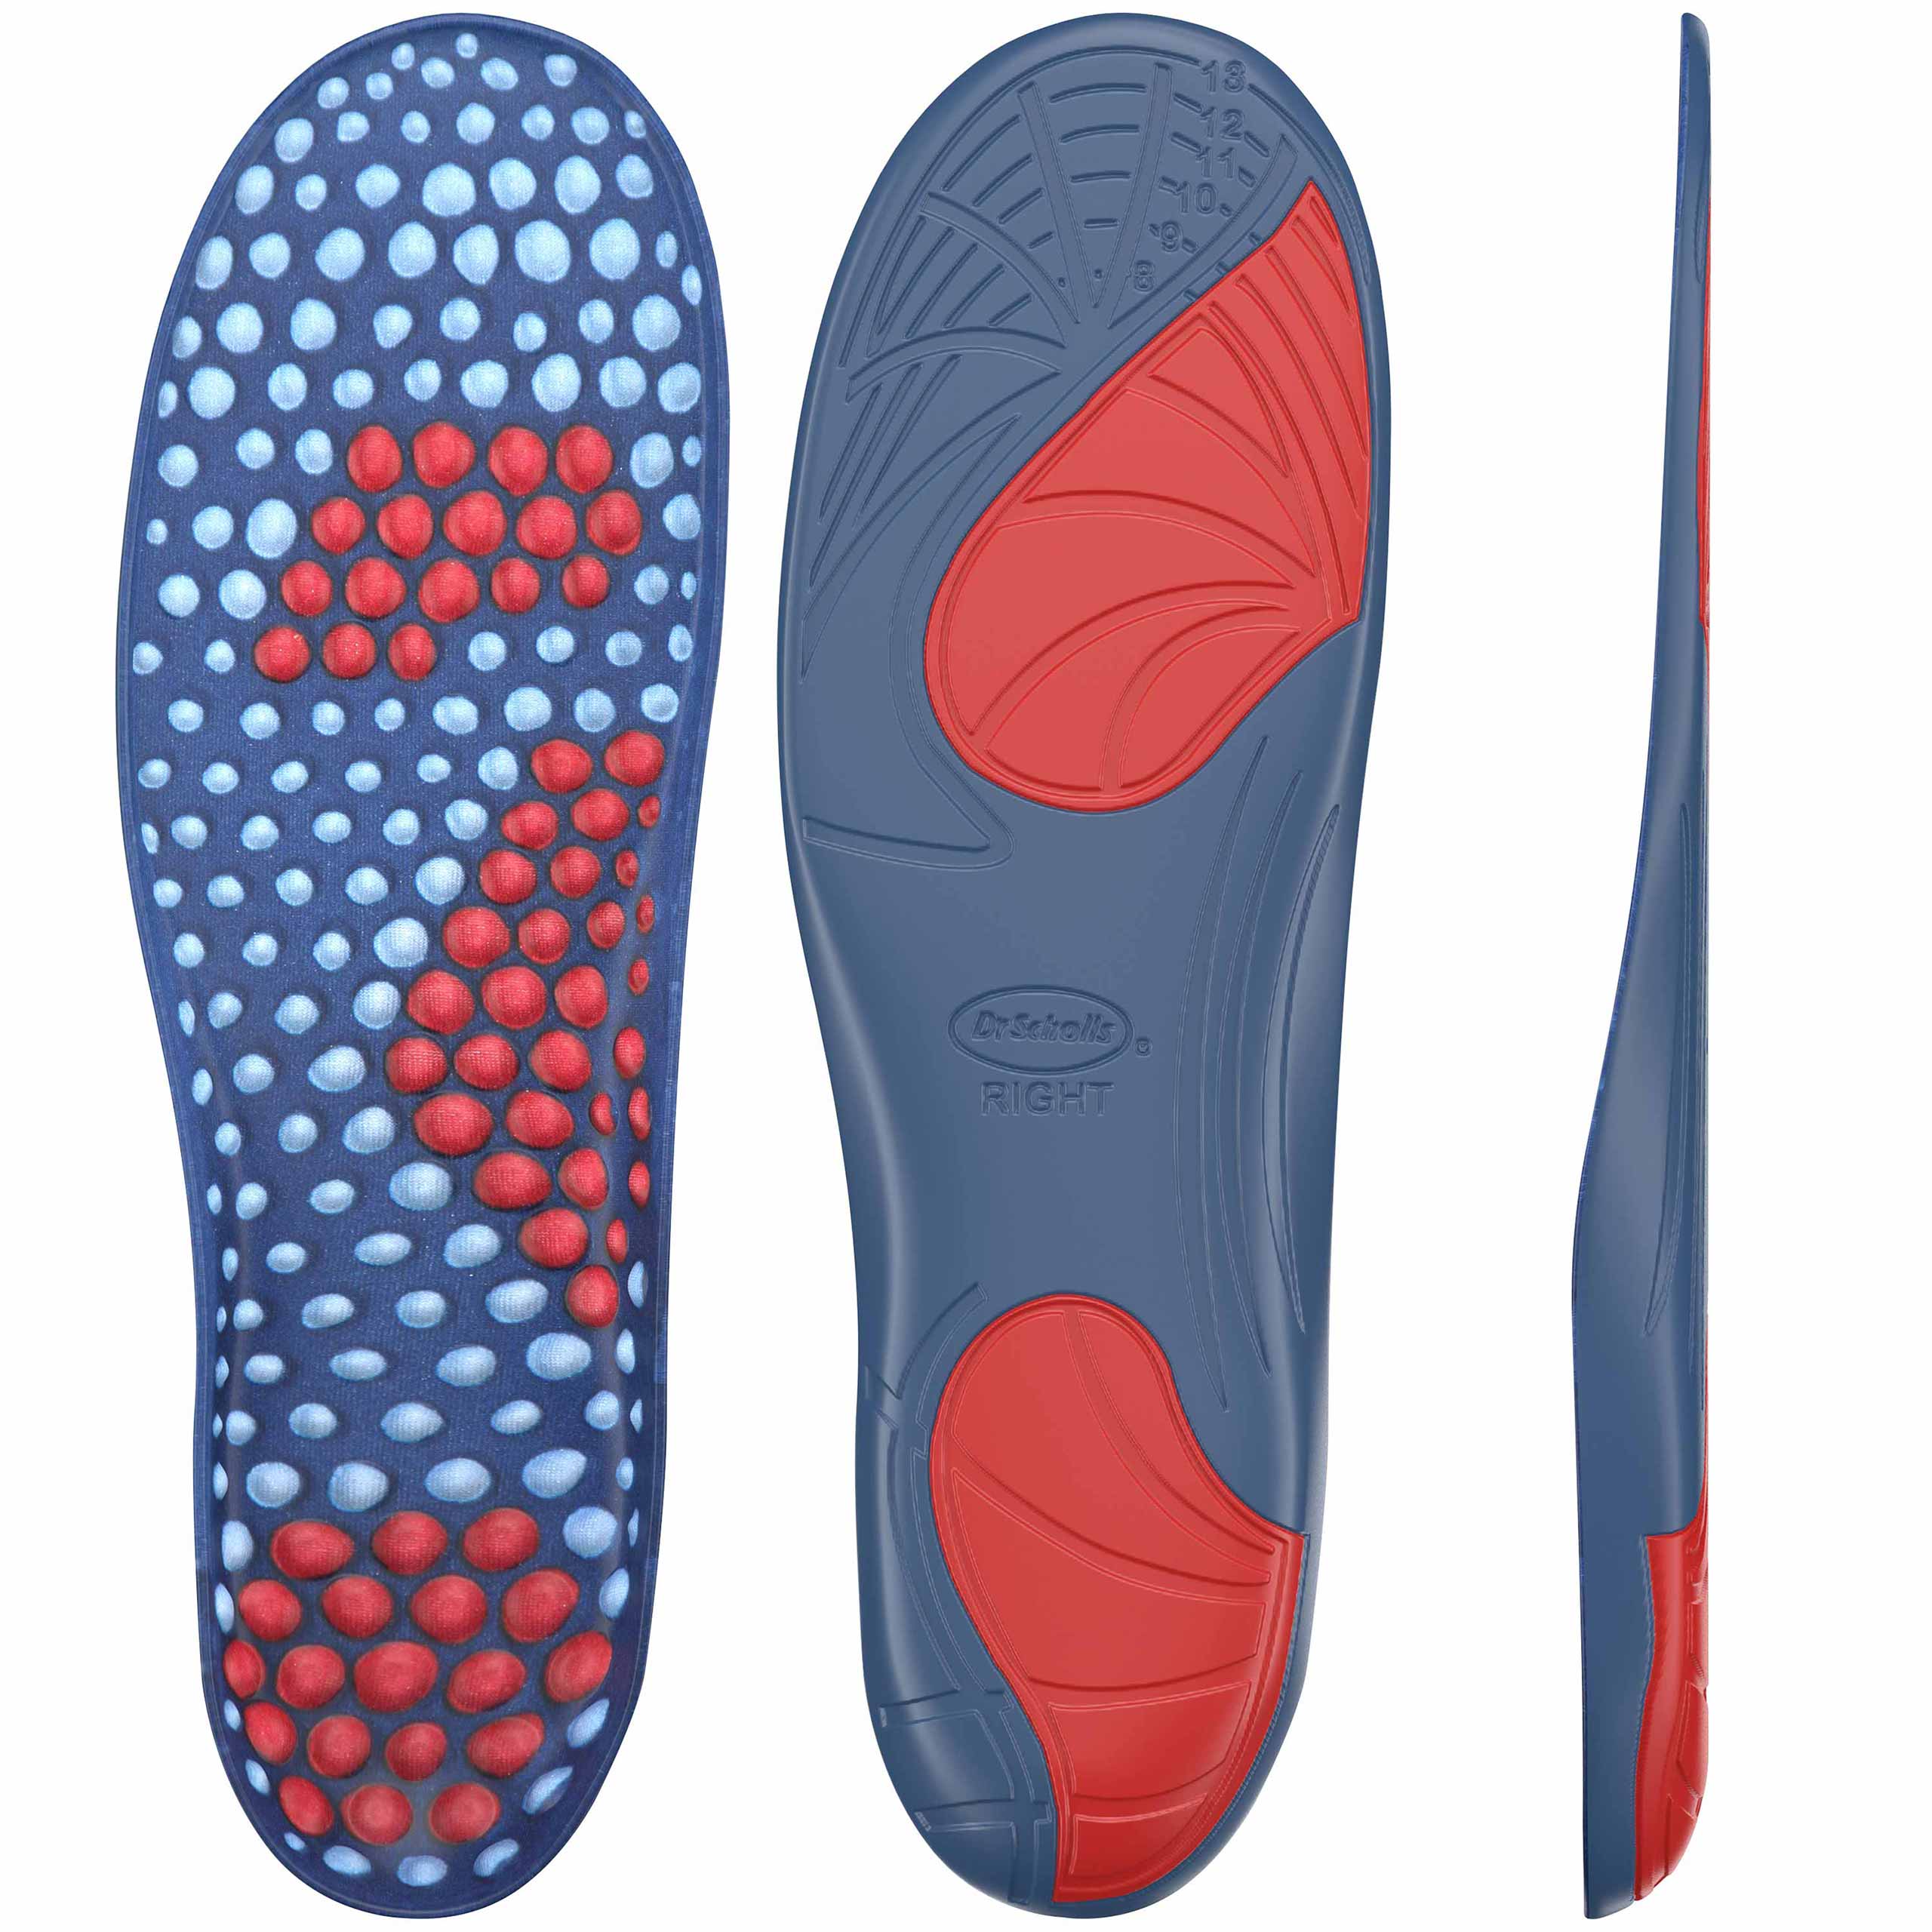 Pain Relief Orthotics for Relief of Sore Feet | Dr. Scholl's